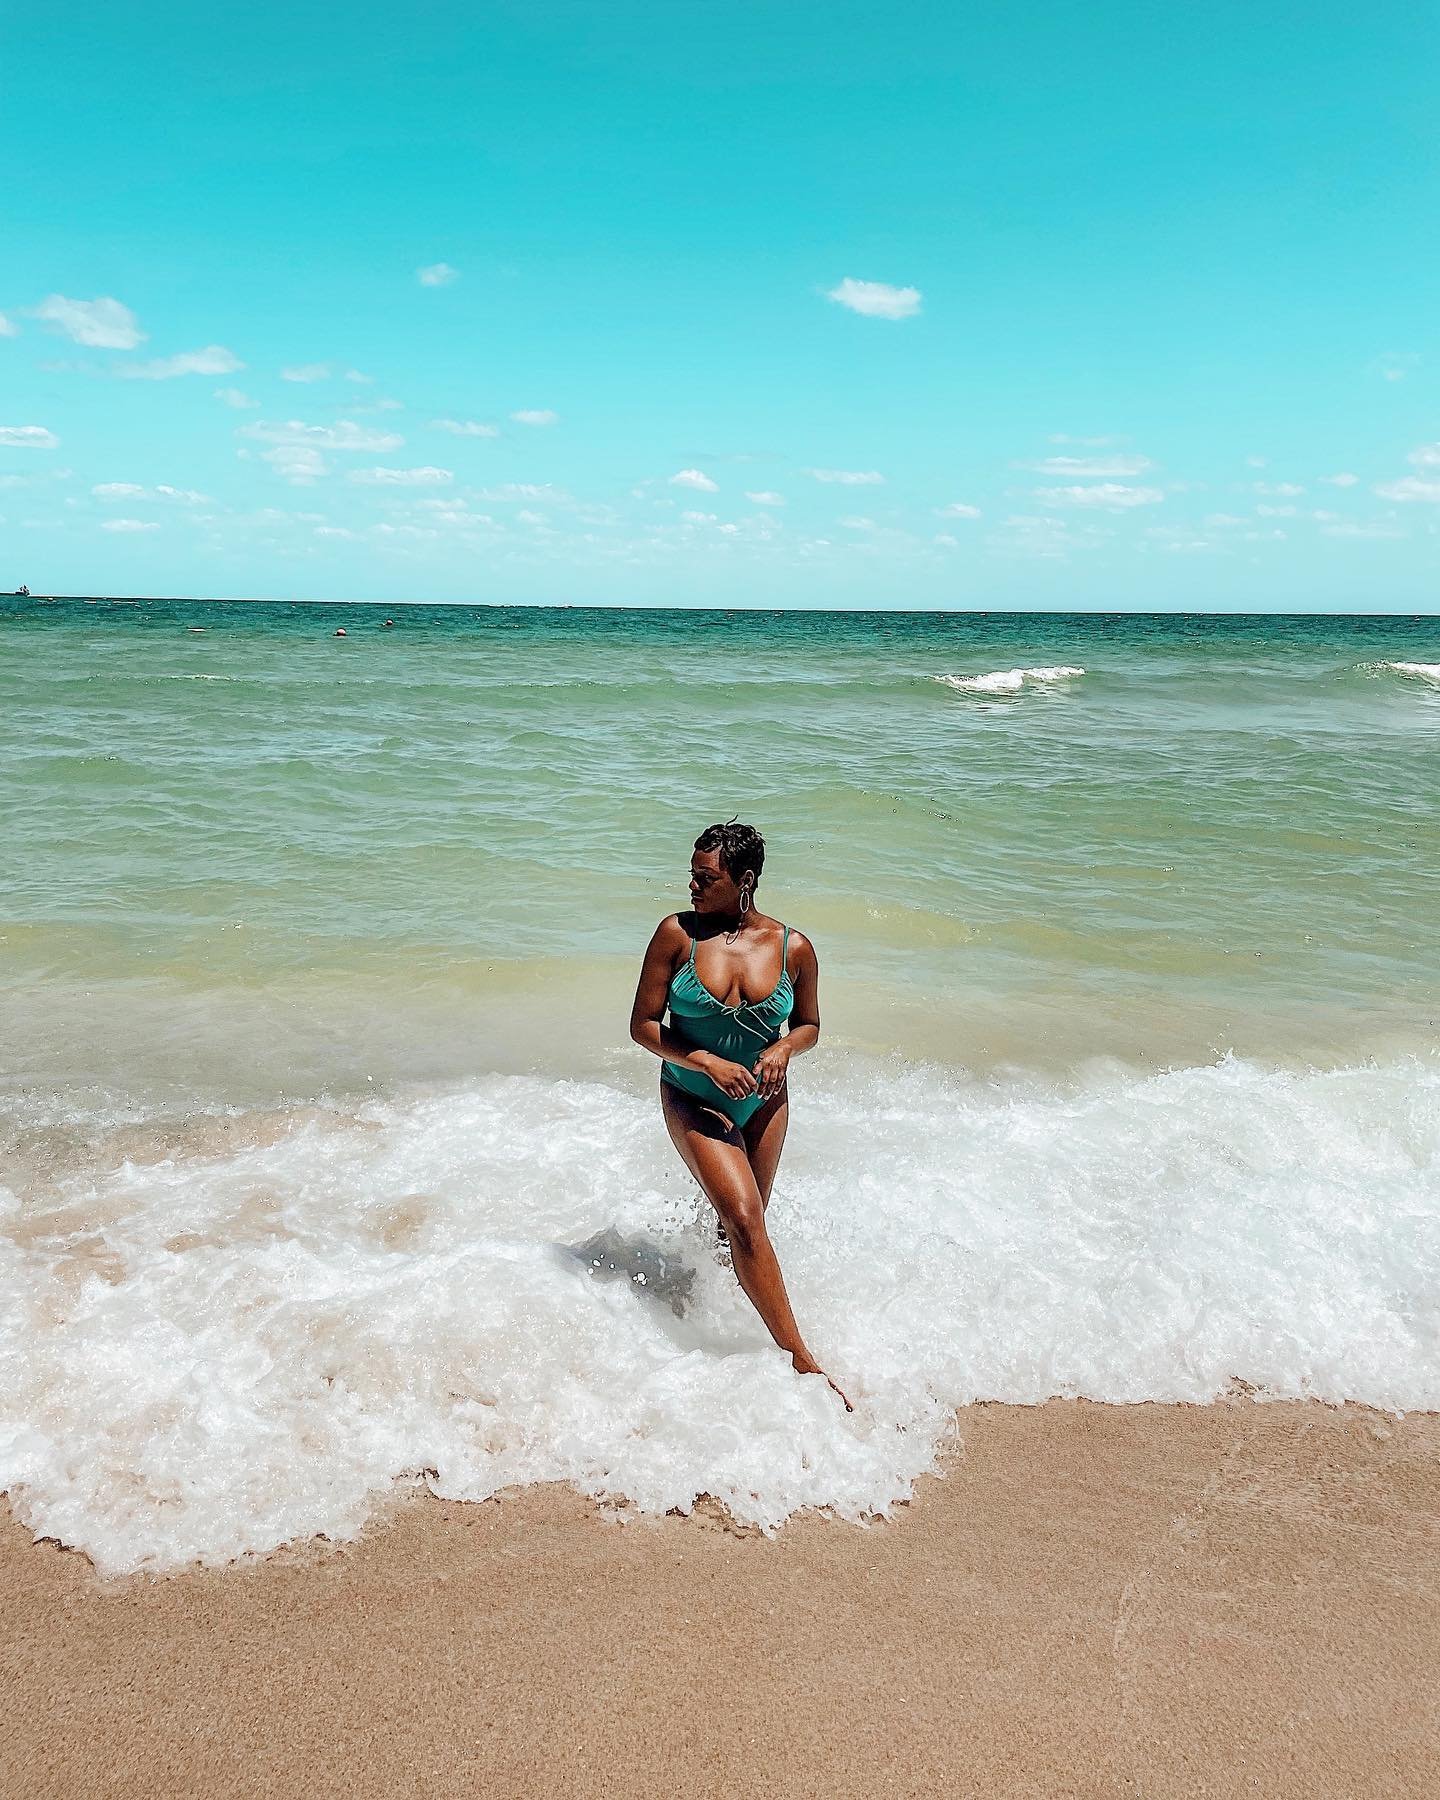 It&rsquo;s a shore thing 🌊 
.
.
Ft. Lauderdale beaches, Ft. Lauderdale things to do, travel content, travel photography, black women travel, black women traveling, travel content creator , flight attendant layovers #travelcontent #travelphotography